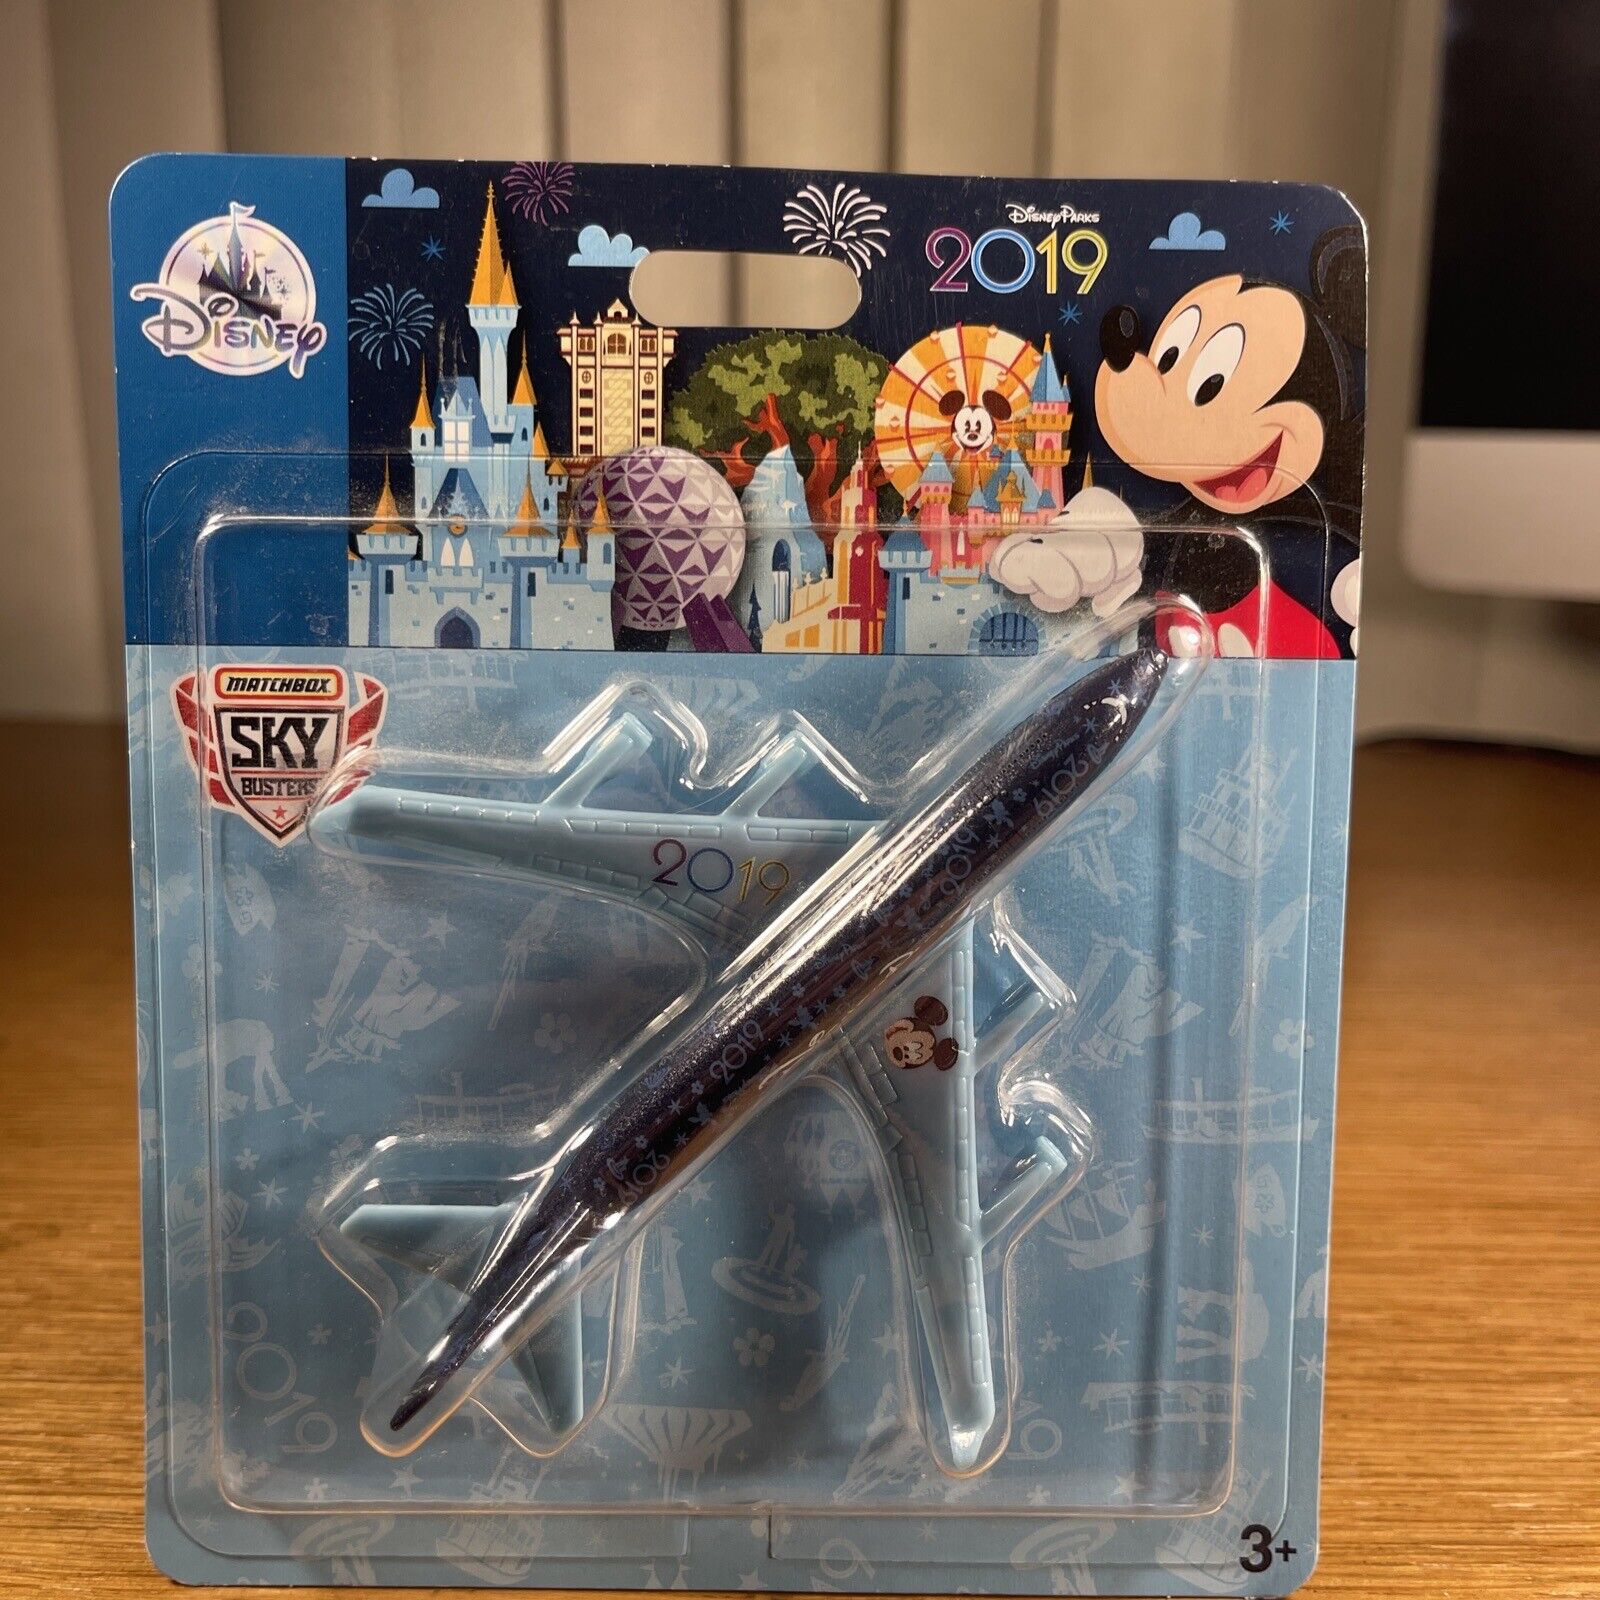 Disney Parks 2019 Mattel Matchbox Mickey Mouse Sky Busters Diecast Plane NEW